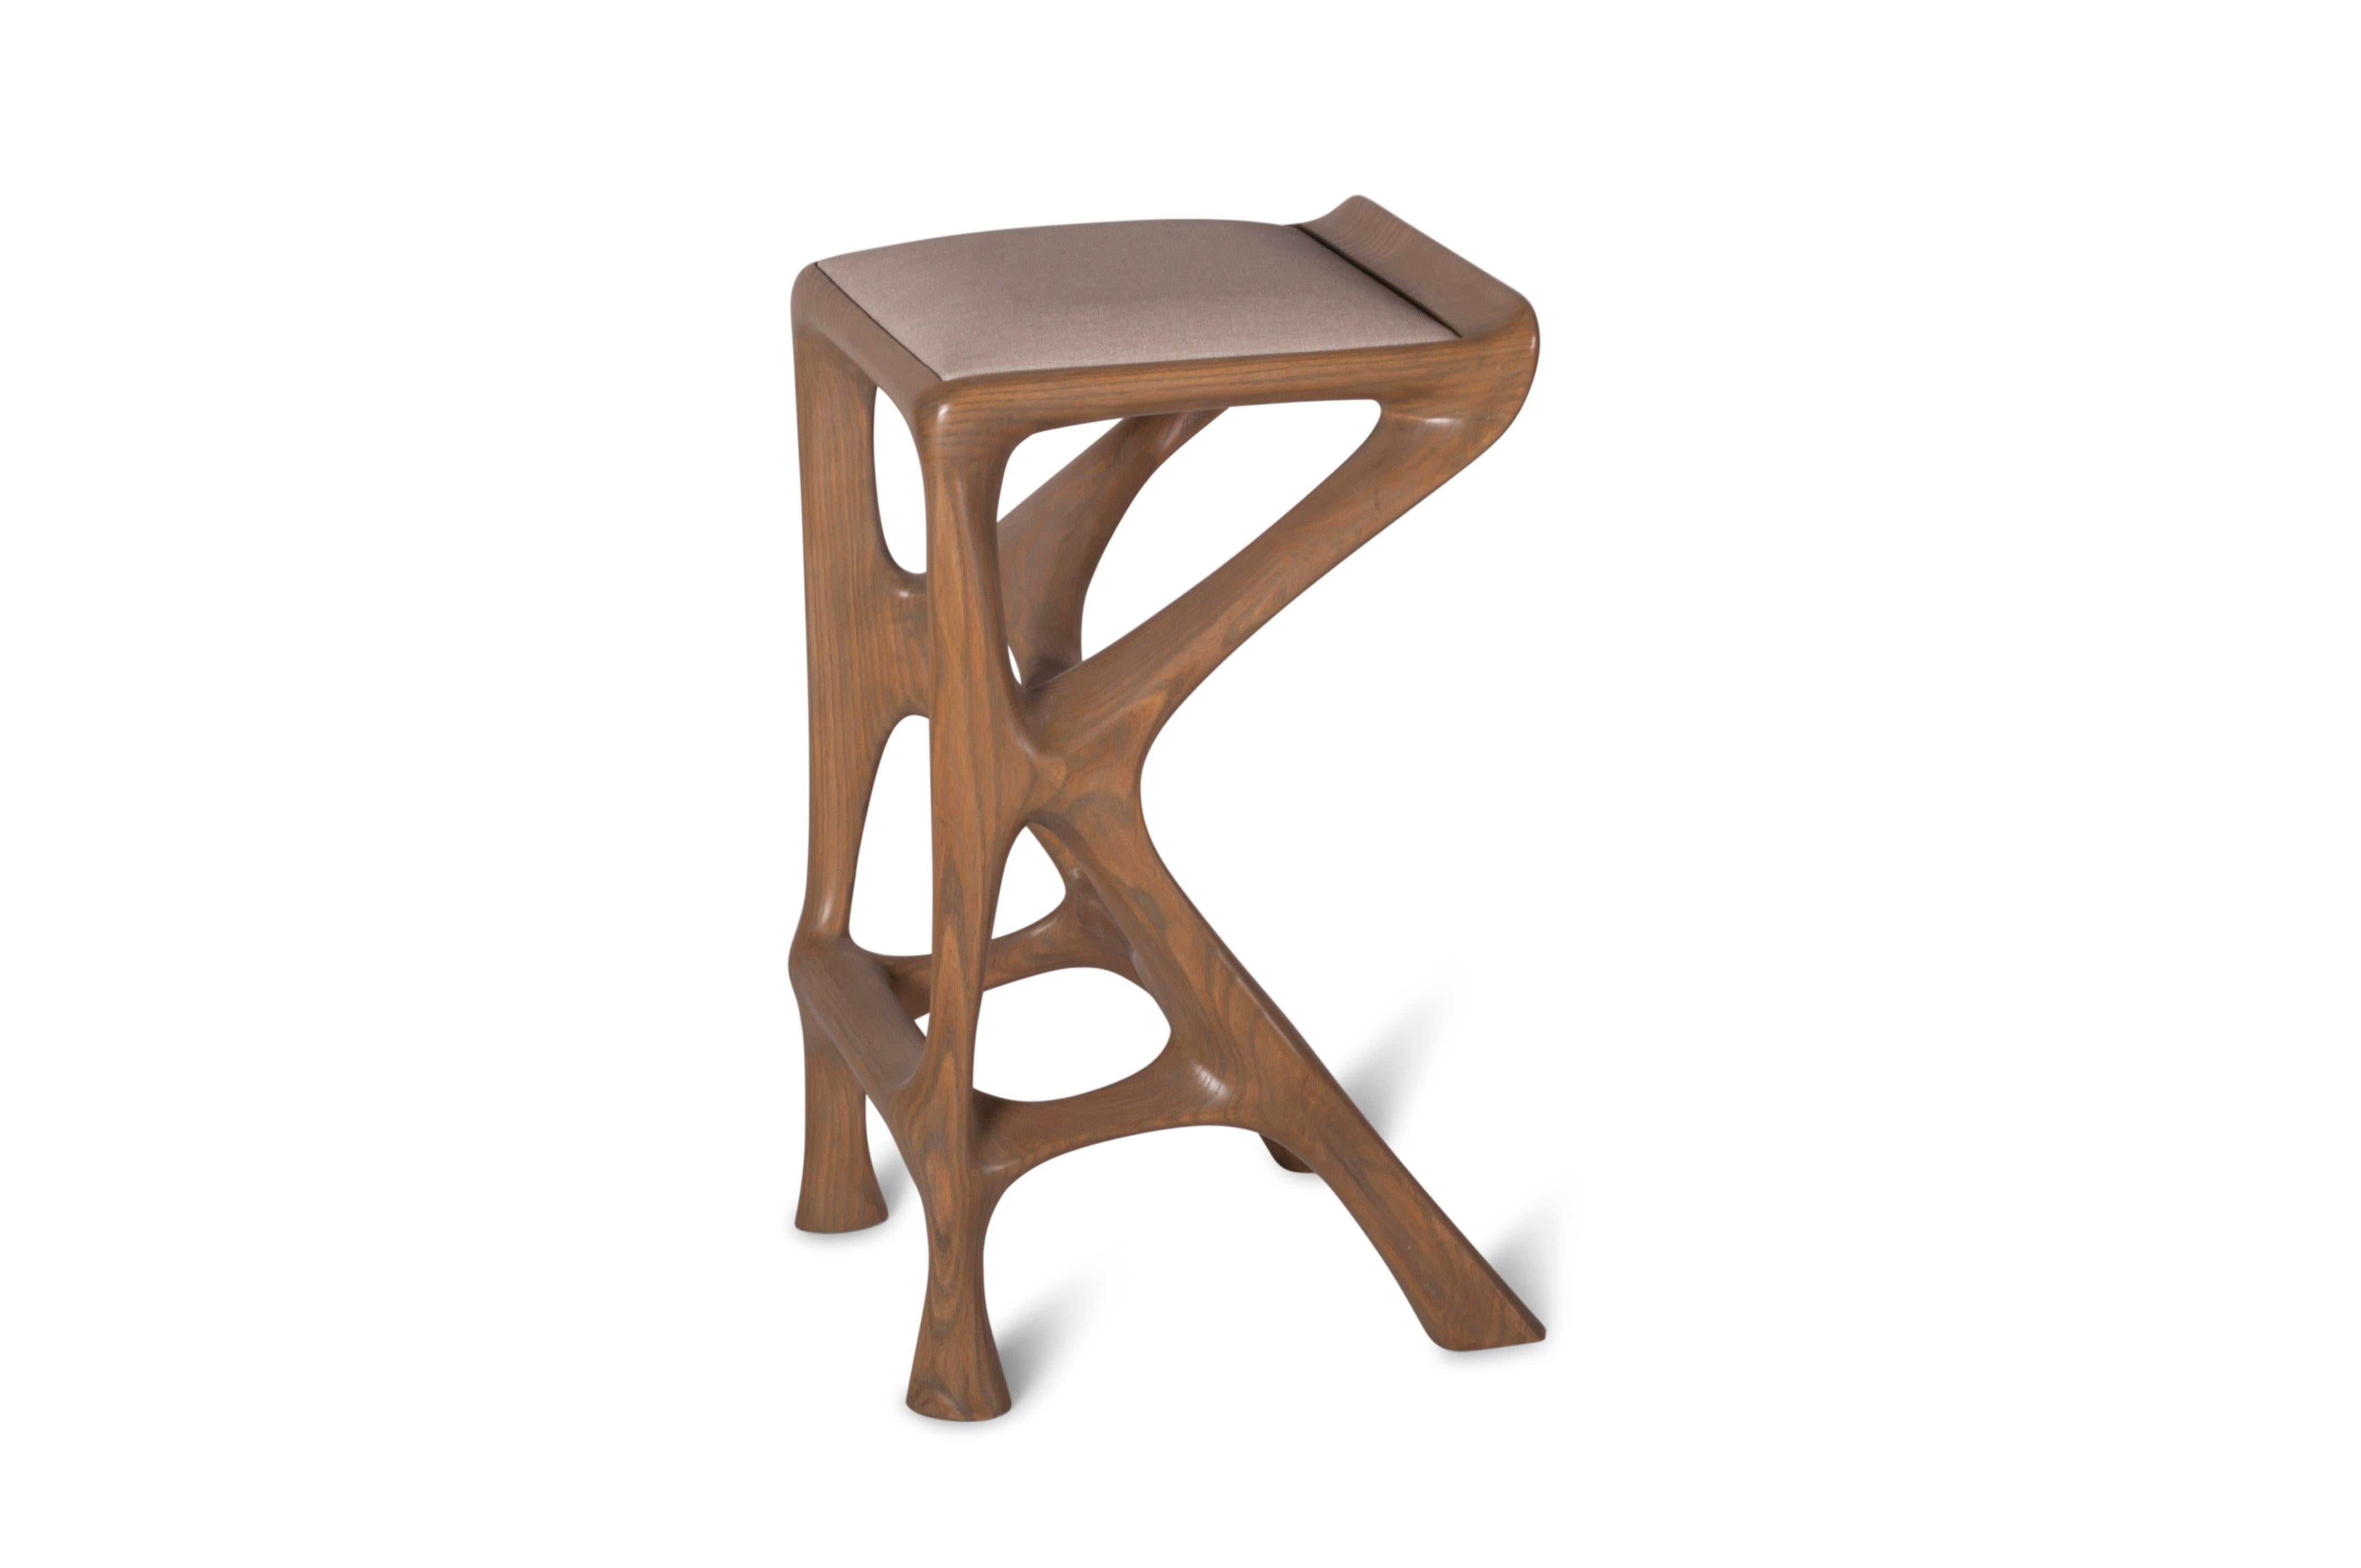 Organic Modern Amorph Chimera Contemporary Bar Stool, Stained Antique Oak with Upholstery For Sale